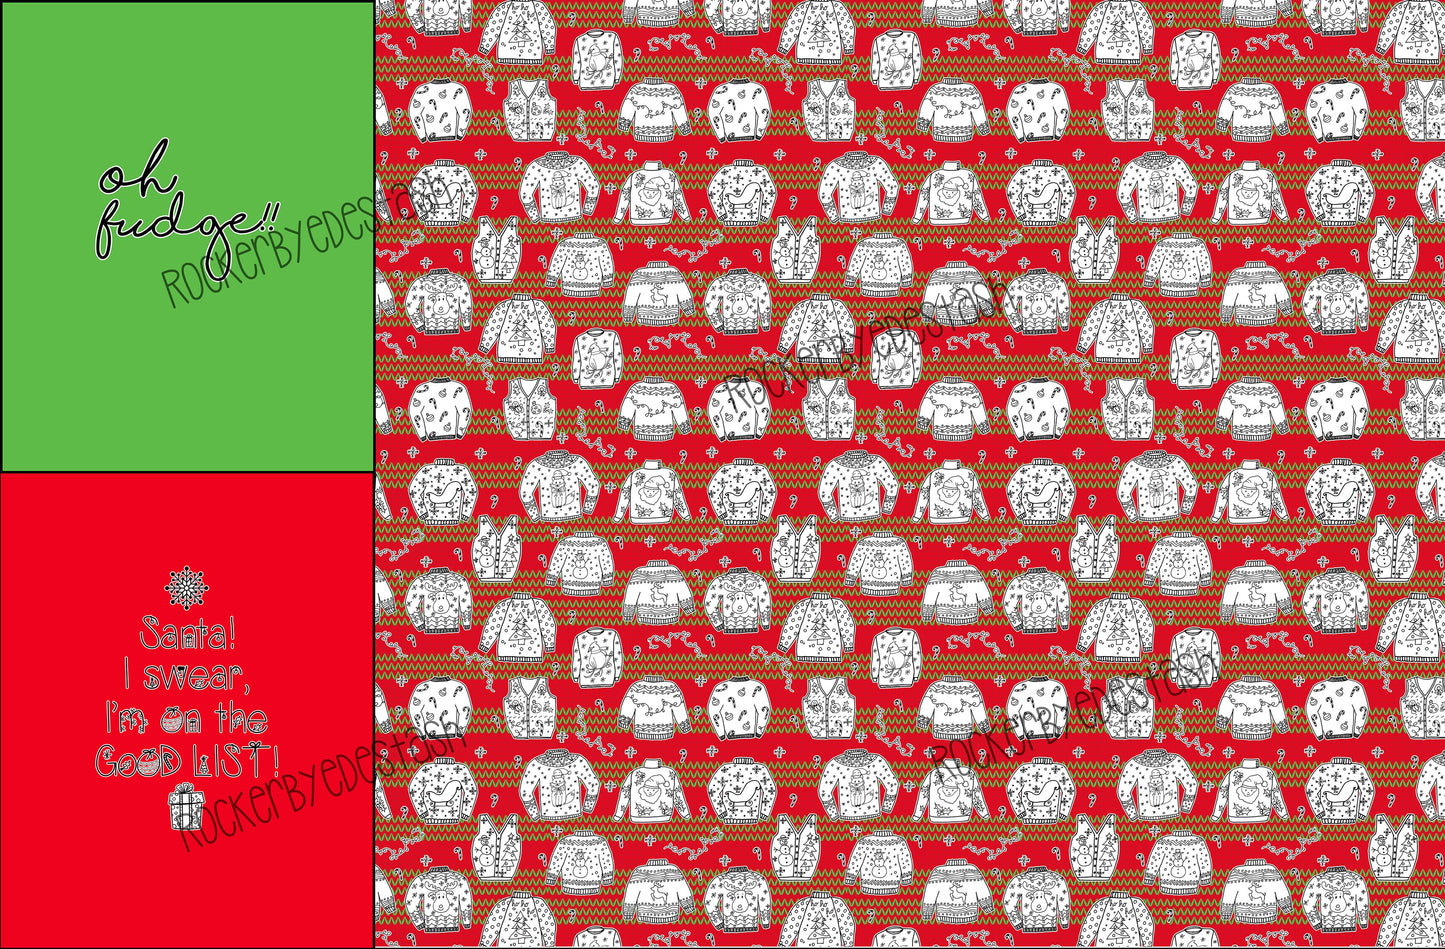 Cotton Lycra Holiday Print Panel Sets - Retail Round TT - Multiple sets designs listed here